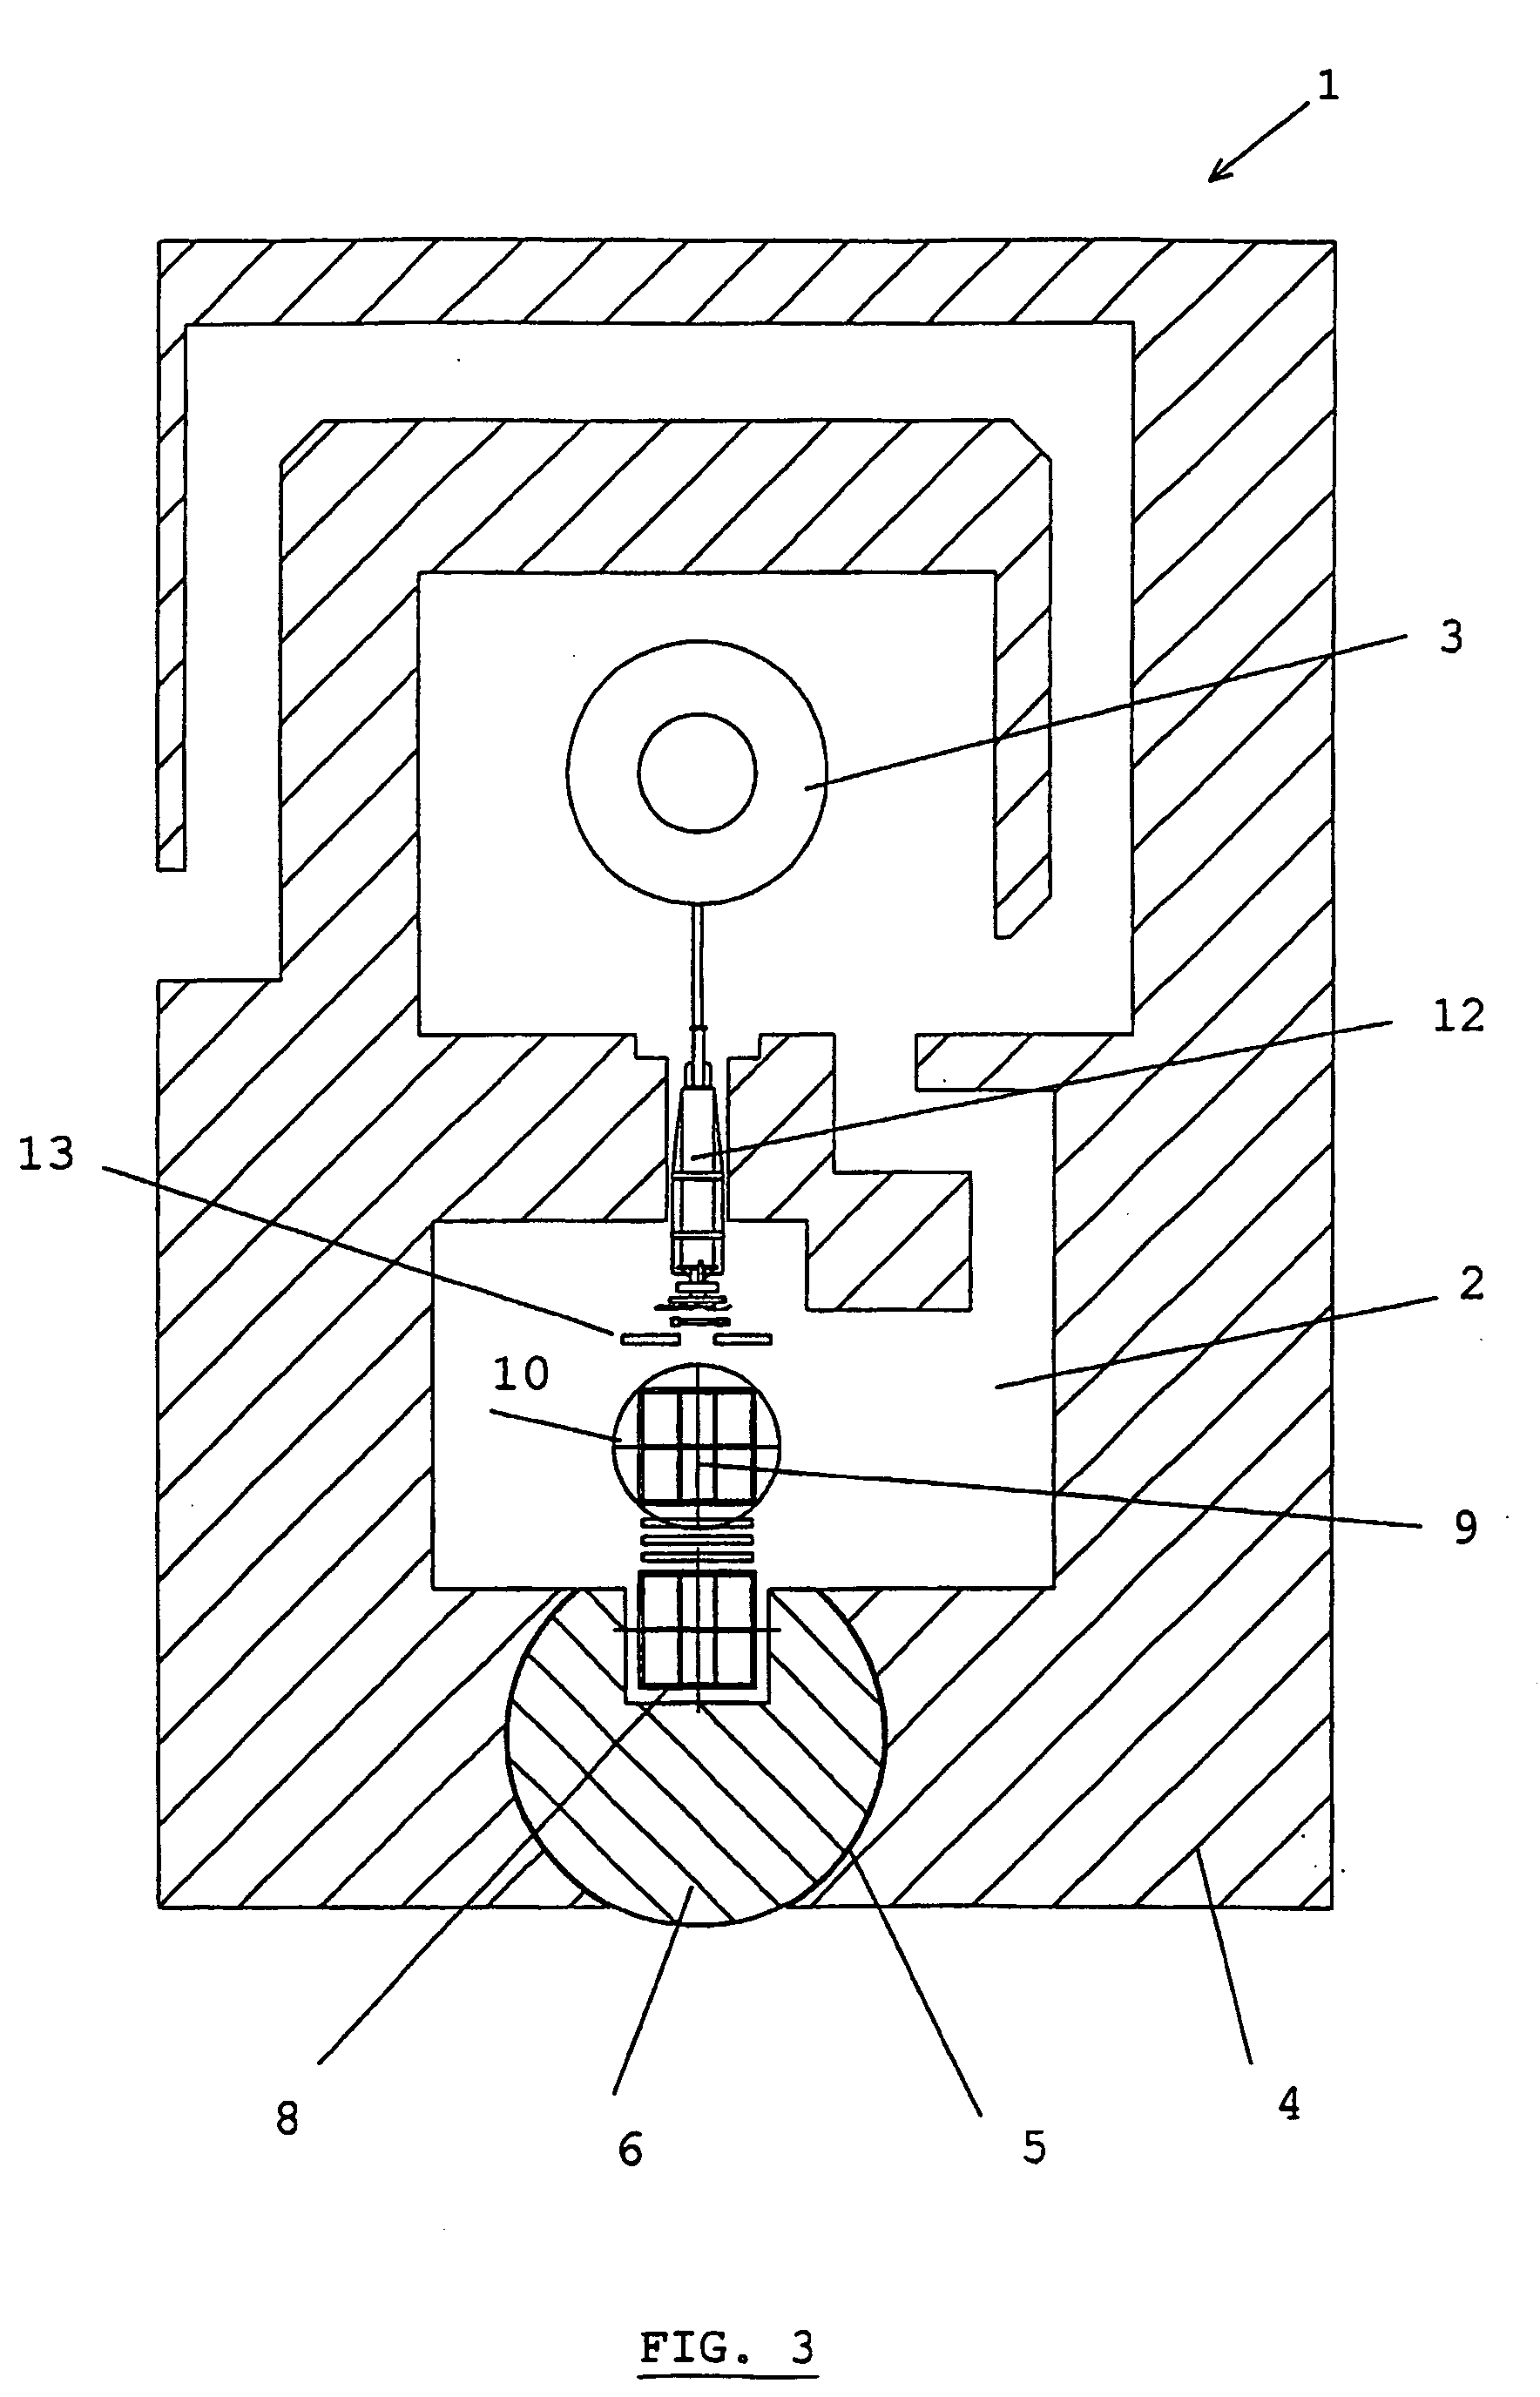 Apparatus and process for irradiating product pallets